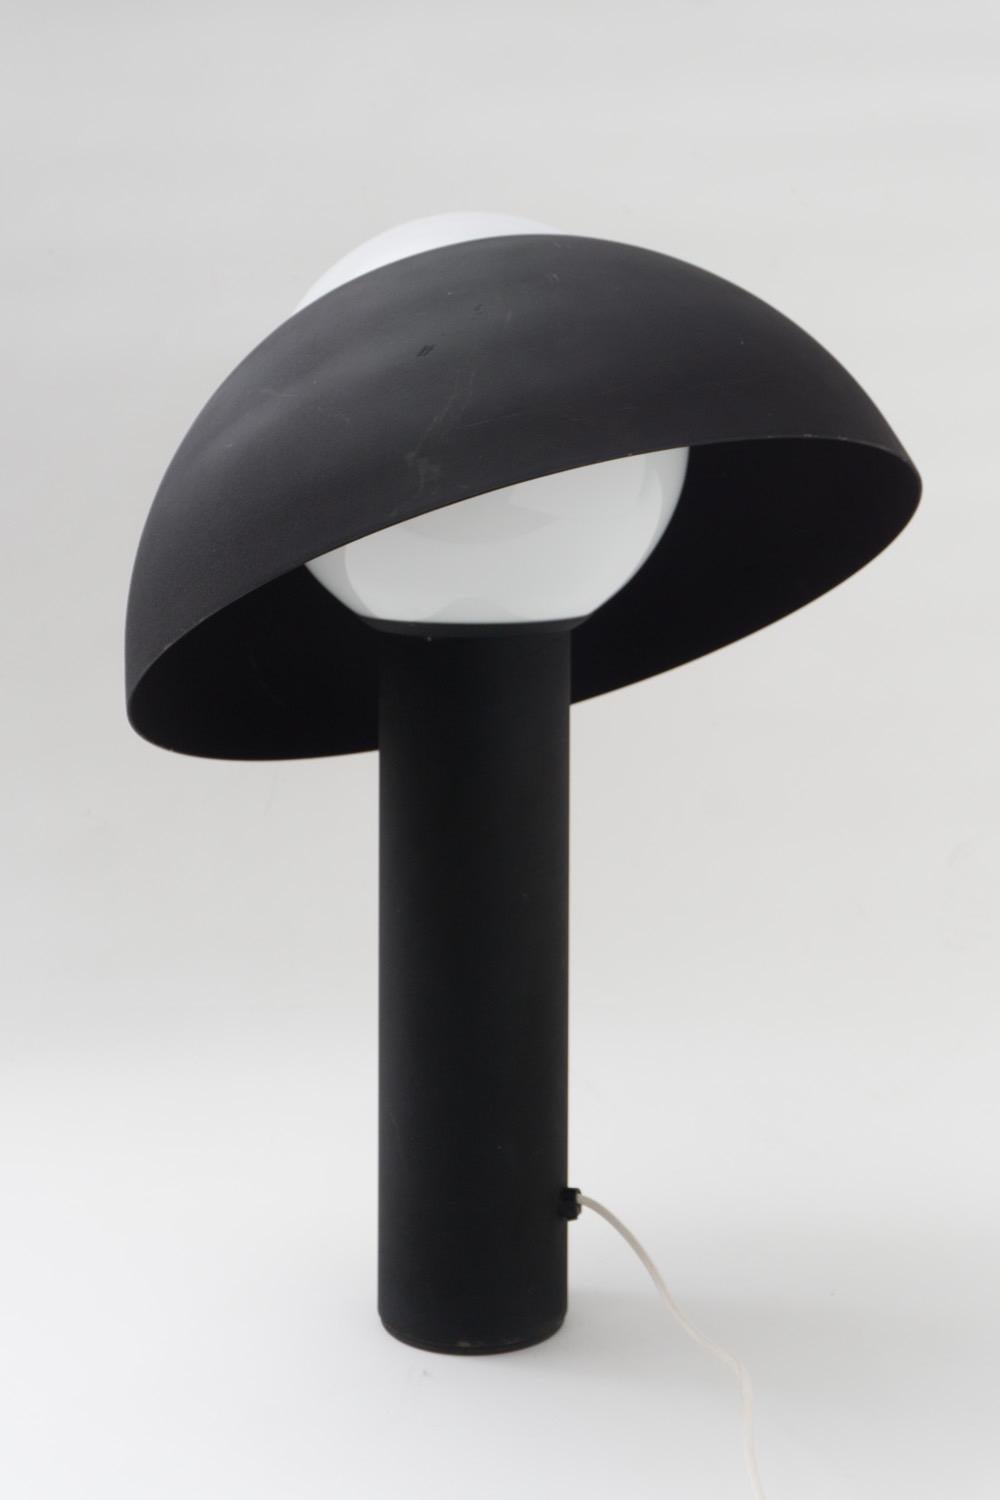 Lacquered Rare Table Lamp 'Nervina', Black Metal, by Sergio Asti, 1962 For Sale